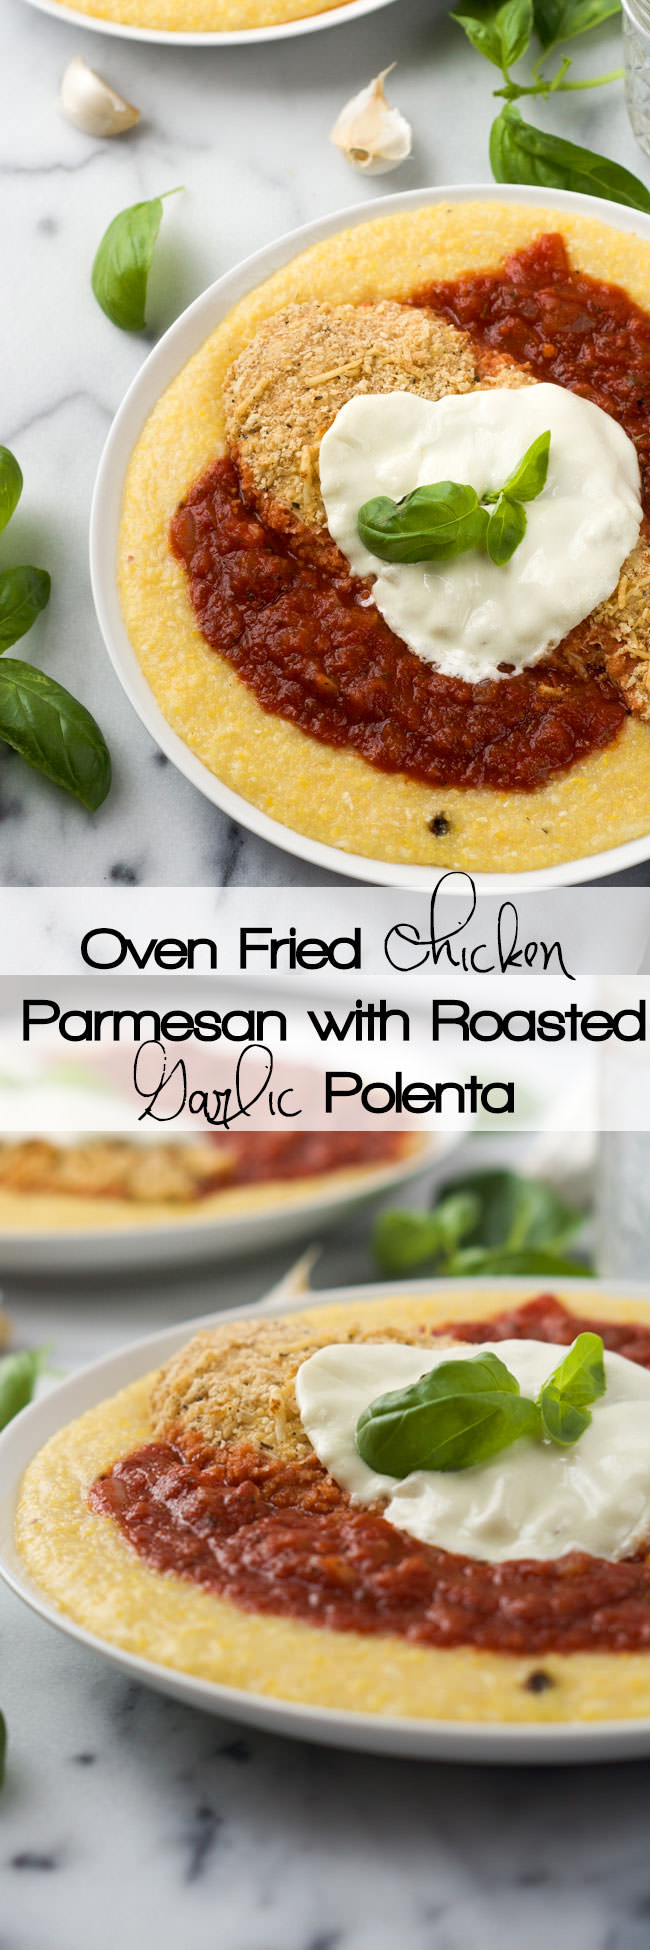 A healthy remake of a restaurant classic. Whole Wheat Chicken Parmesan is crispy and fully of flavor. Served in a bath of rustic tomato sauce and cheesy, roasted garlic grits!